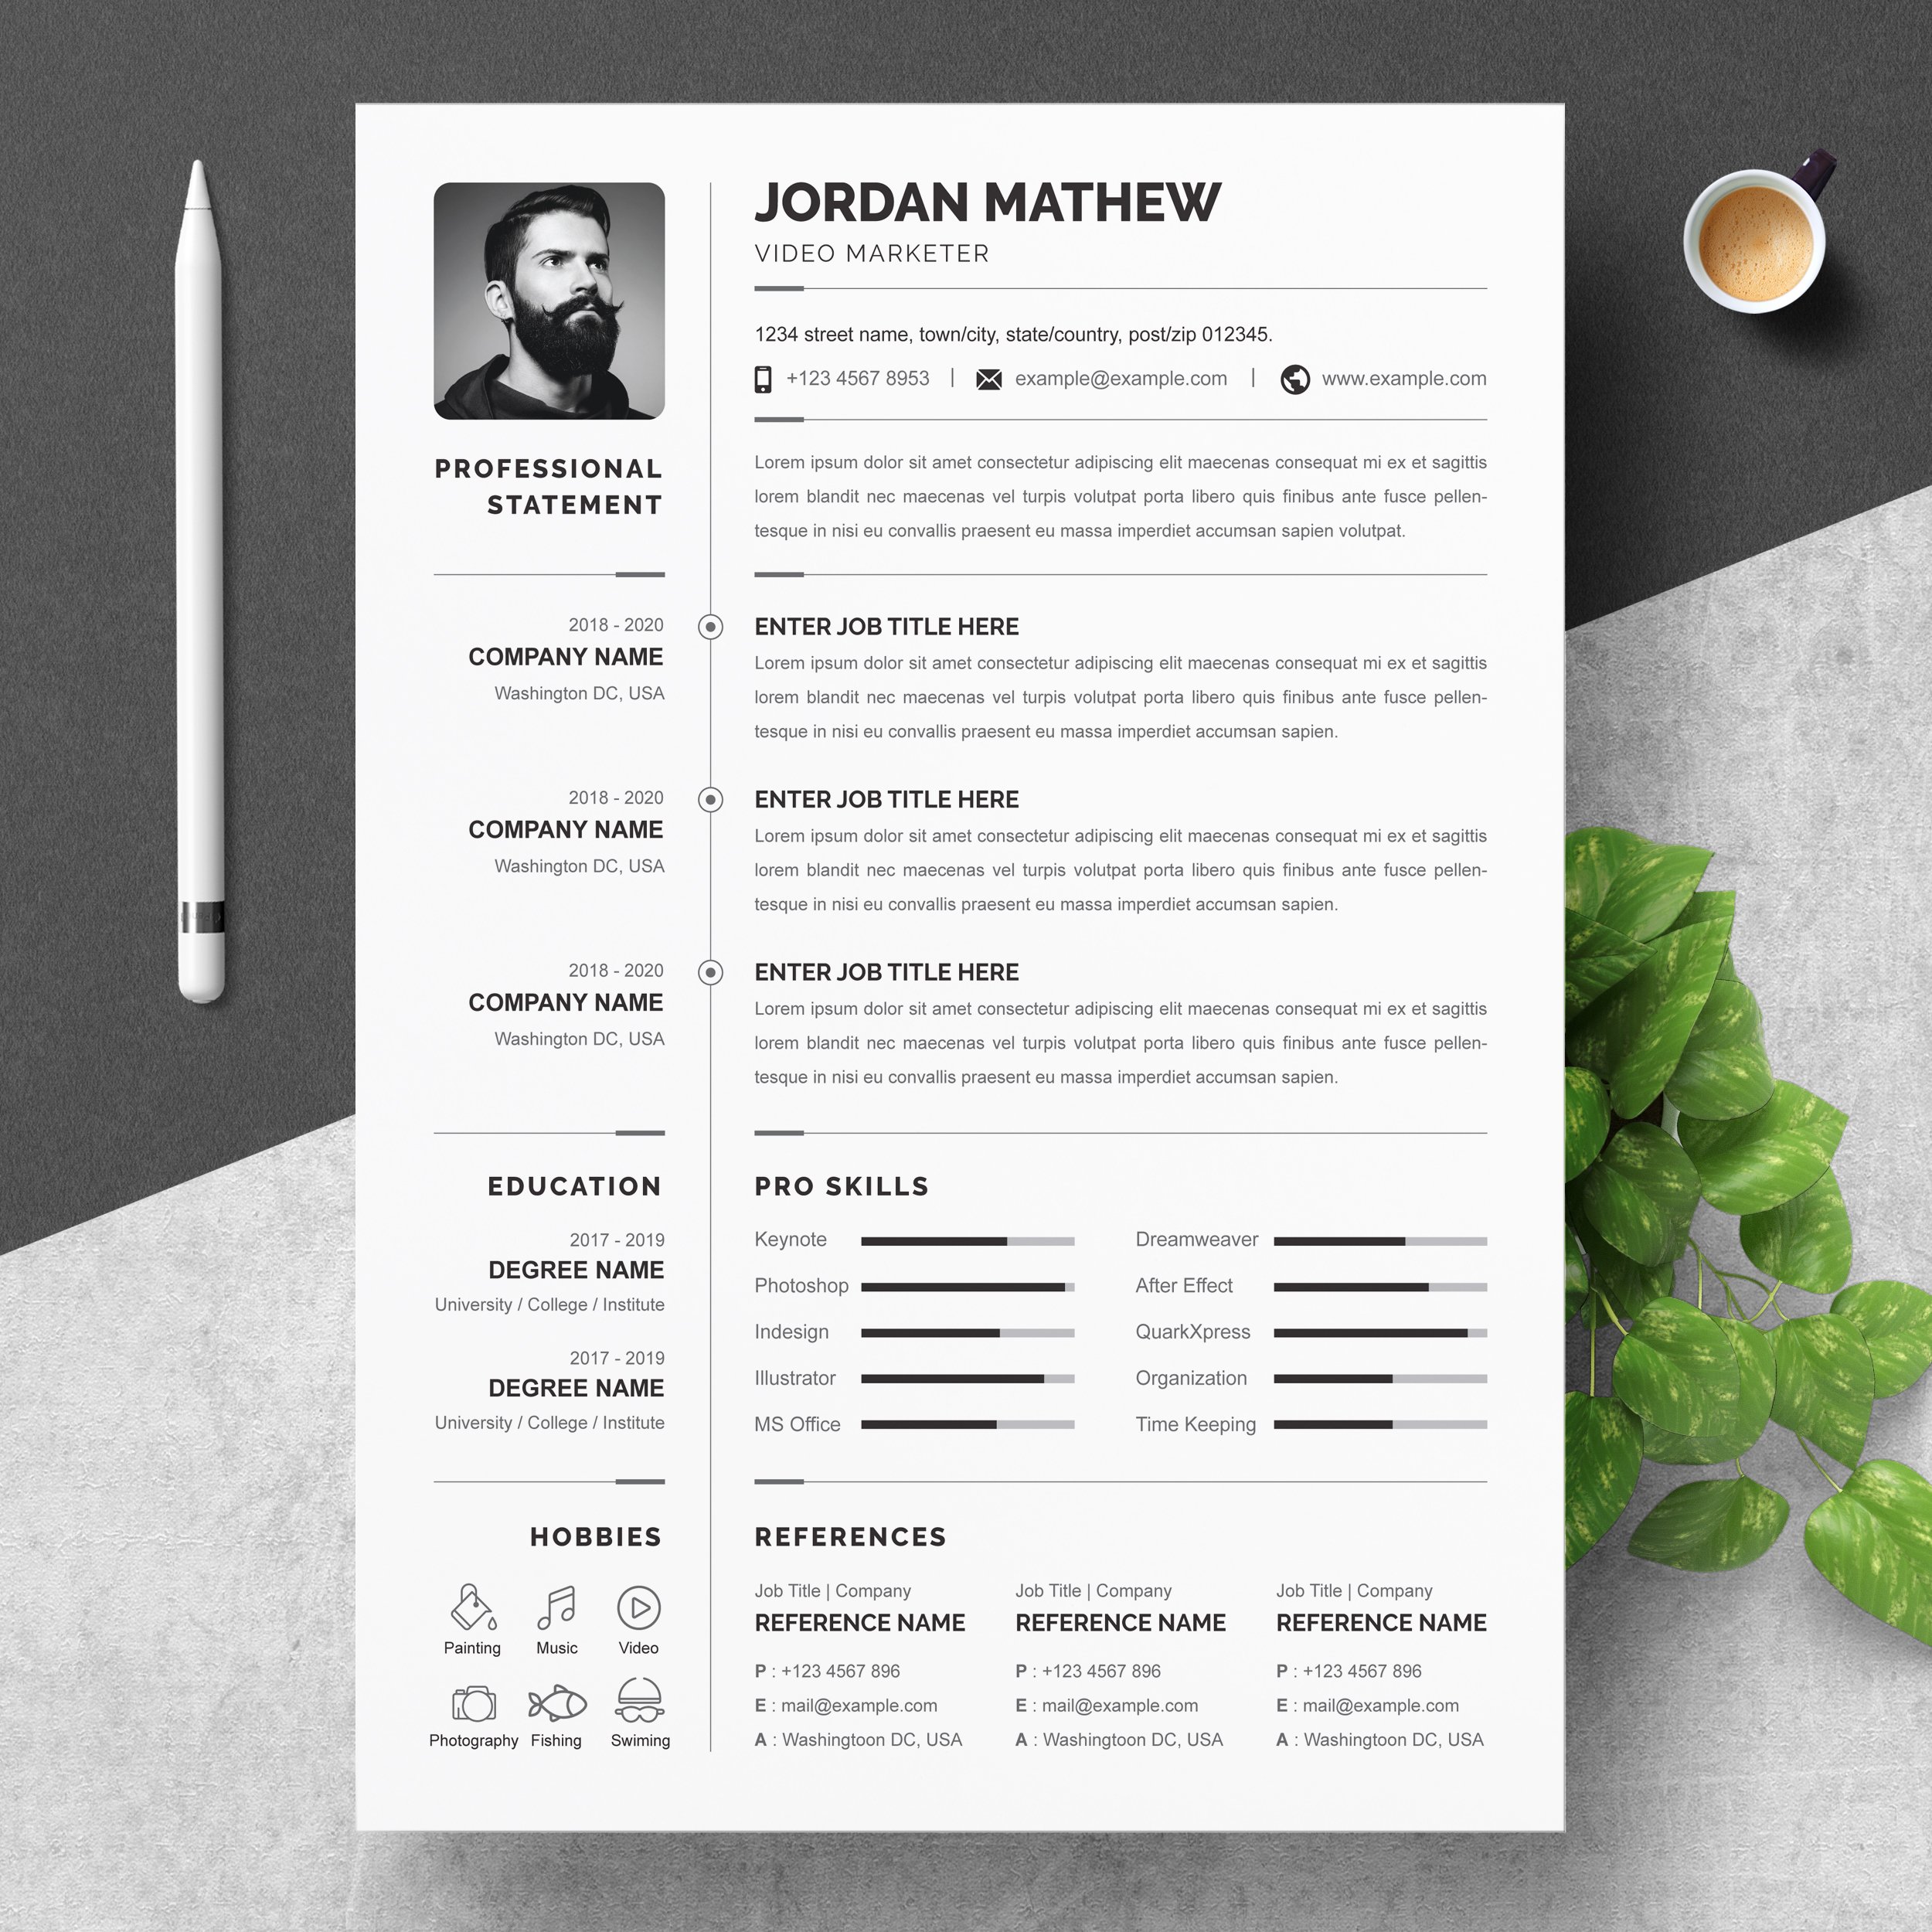 Professional Resume Microsoft Word cover image.